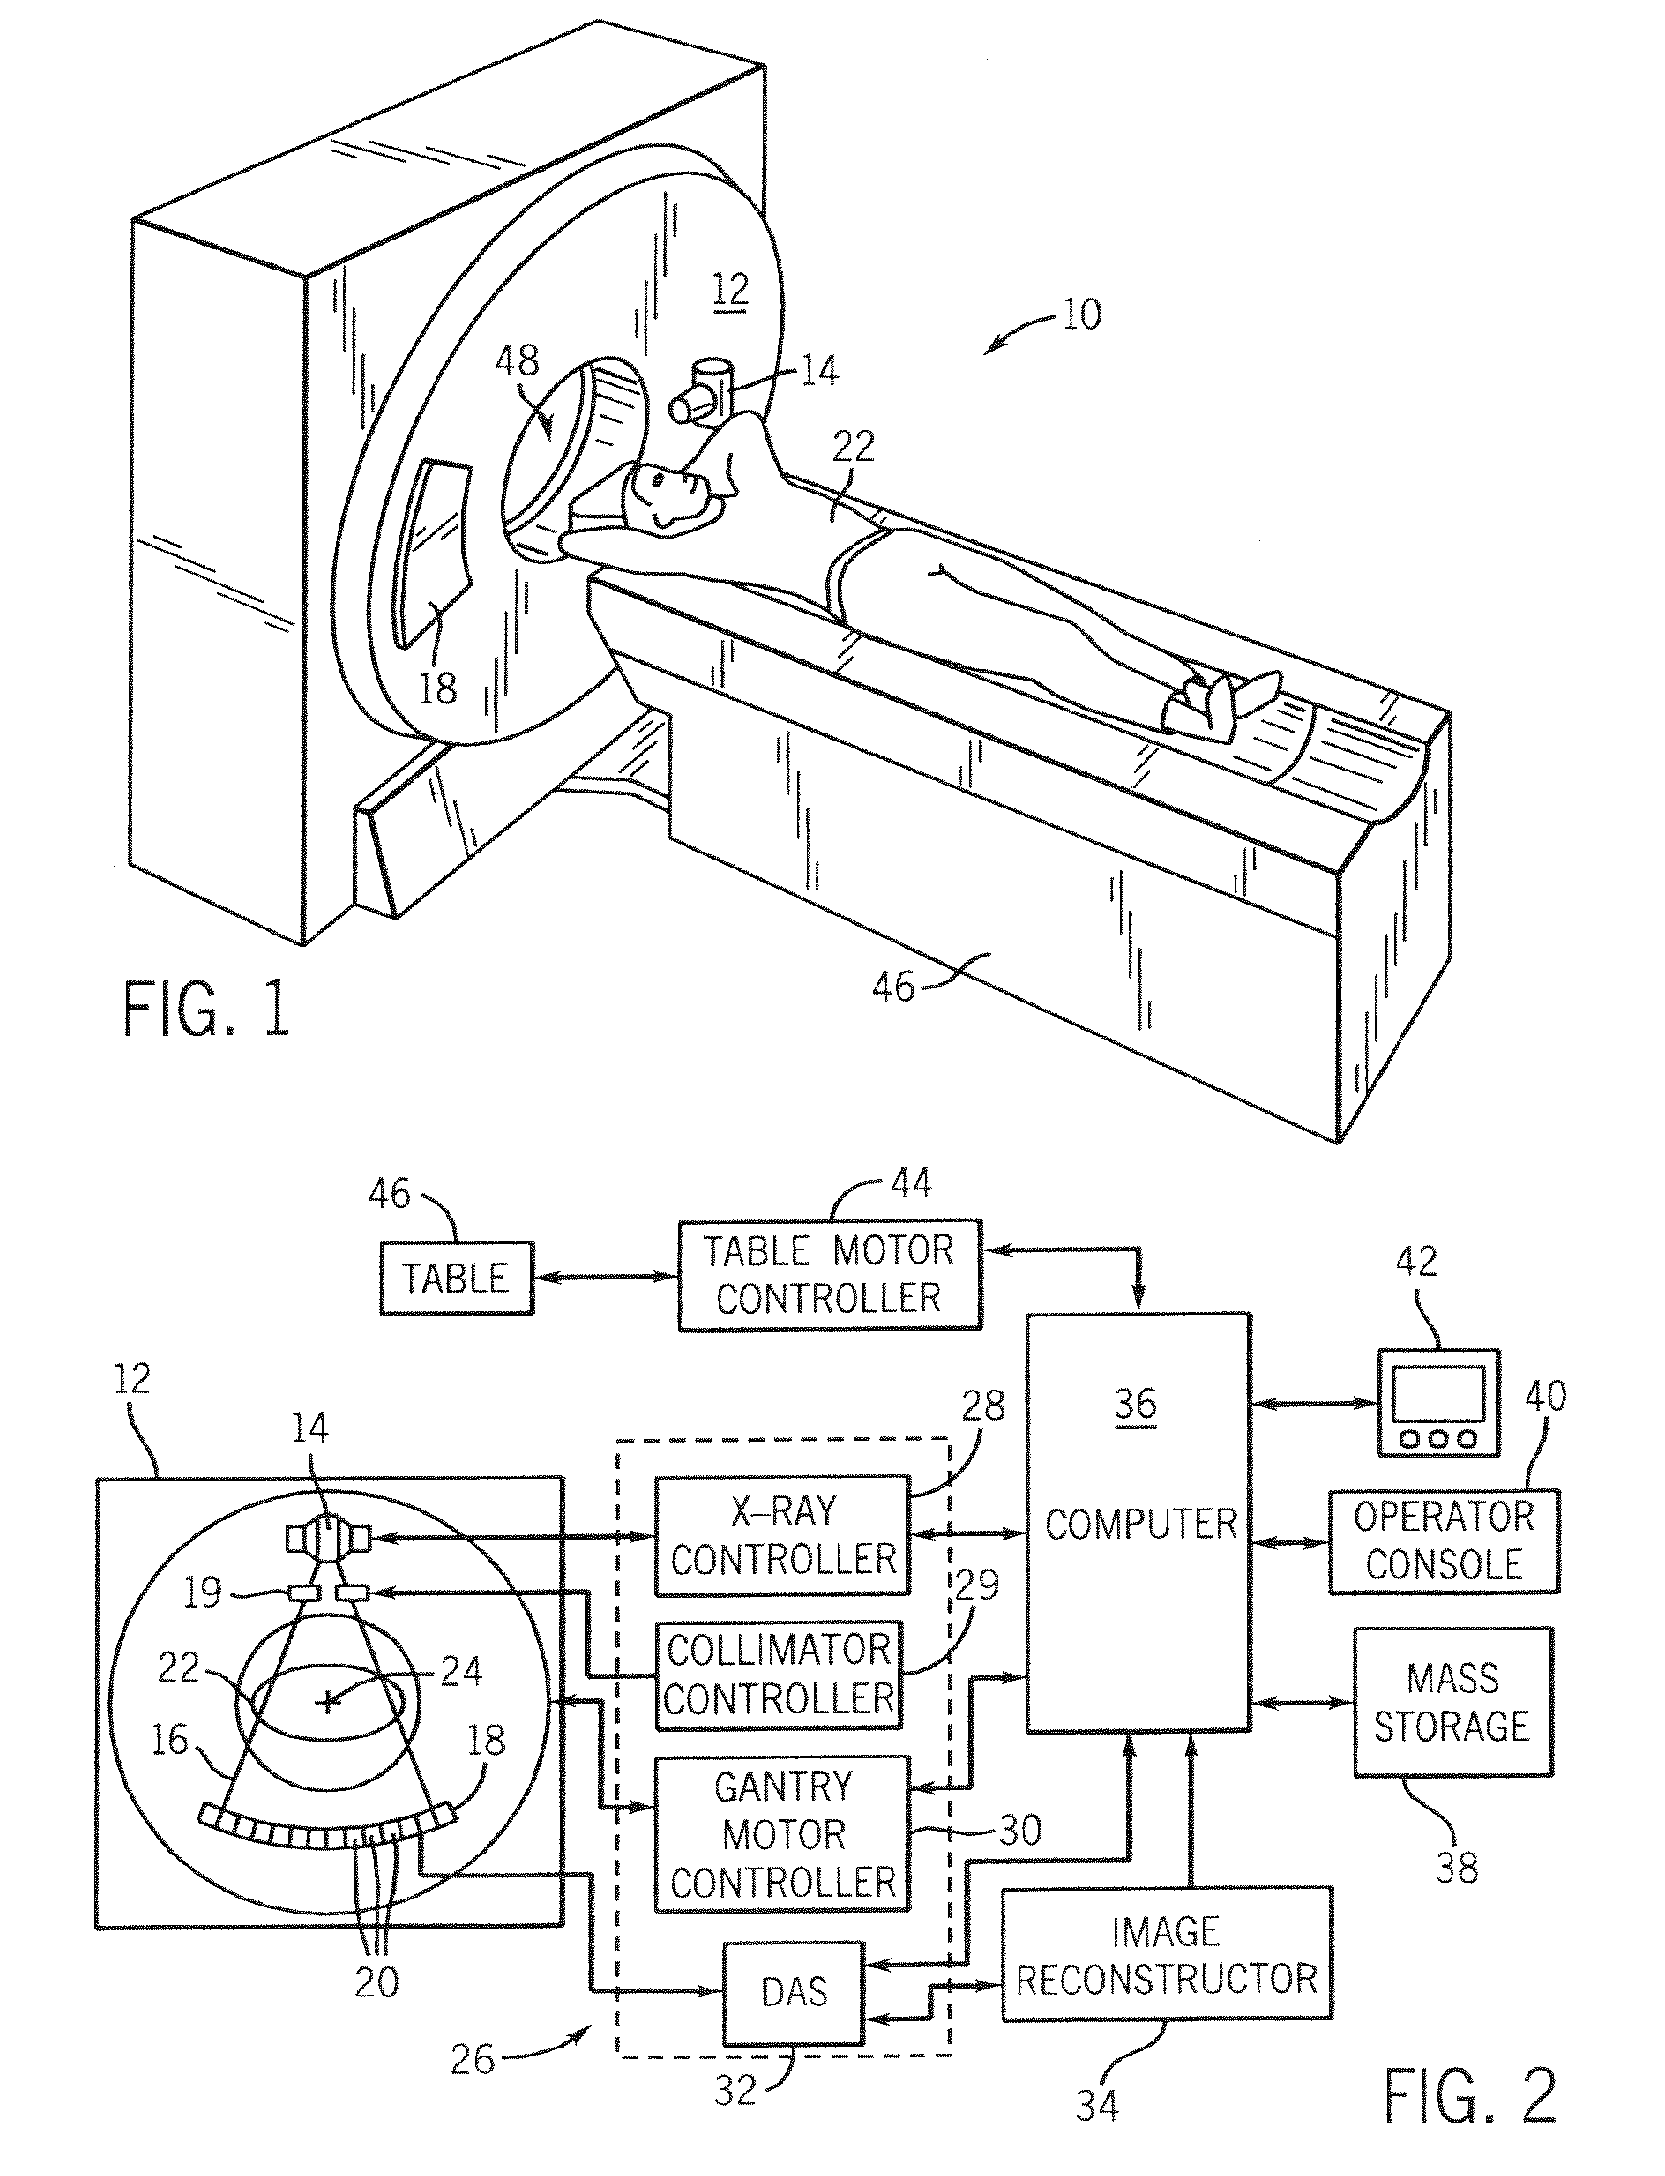 Apparatus for acquisition of CT data with penumbra attenuation calibration